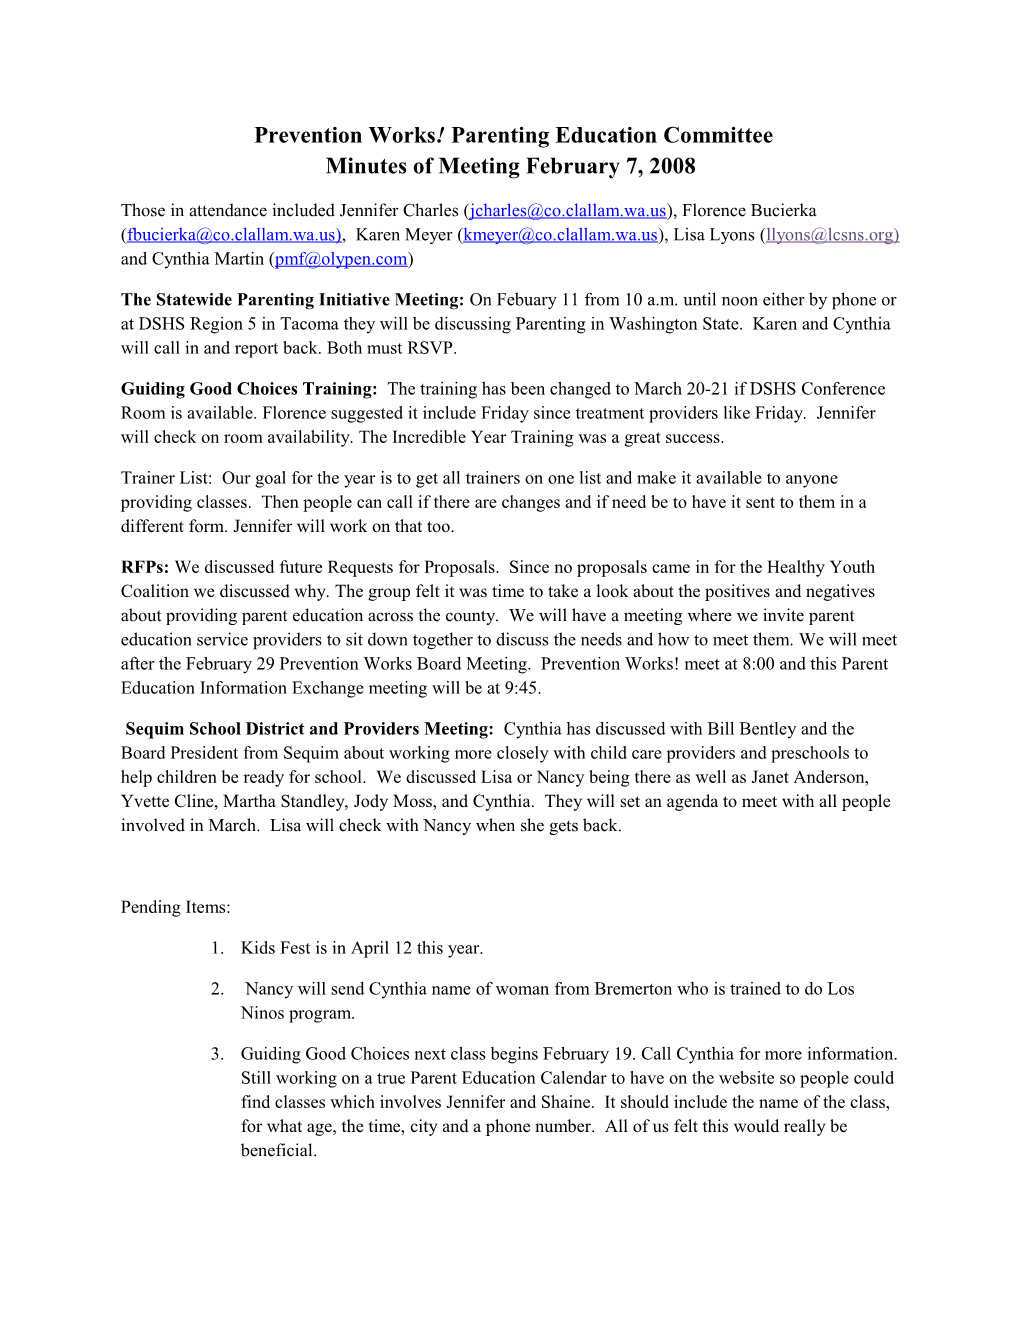 Prevention Works!Parenting Education Committee Minutes of Meeting February 7, 2008